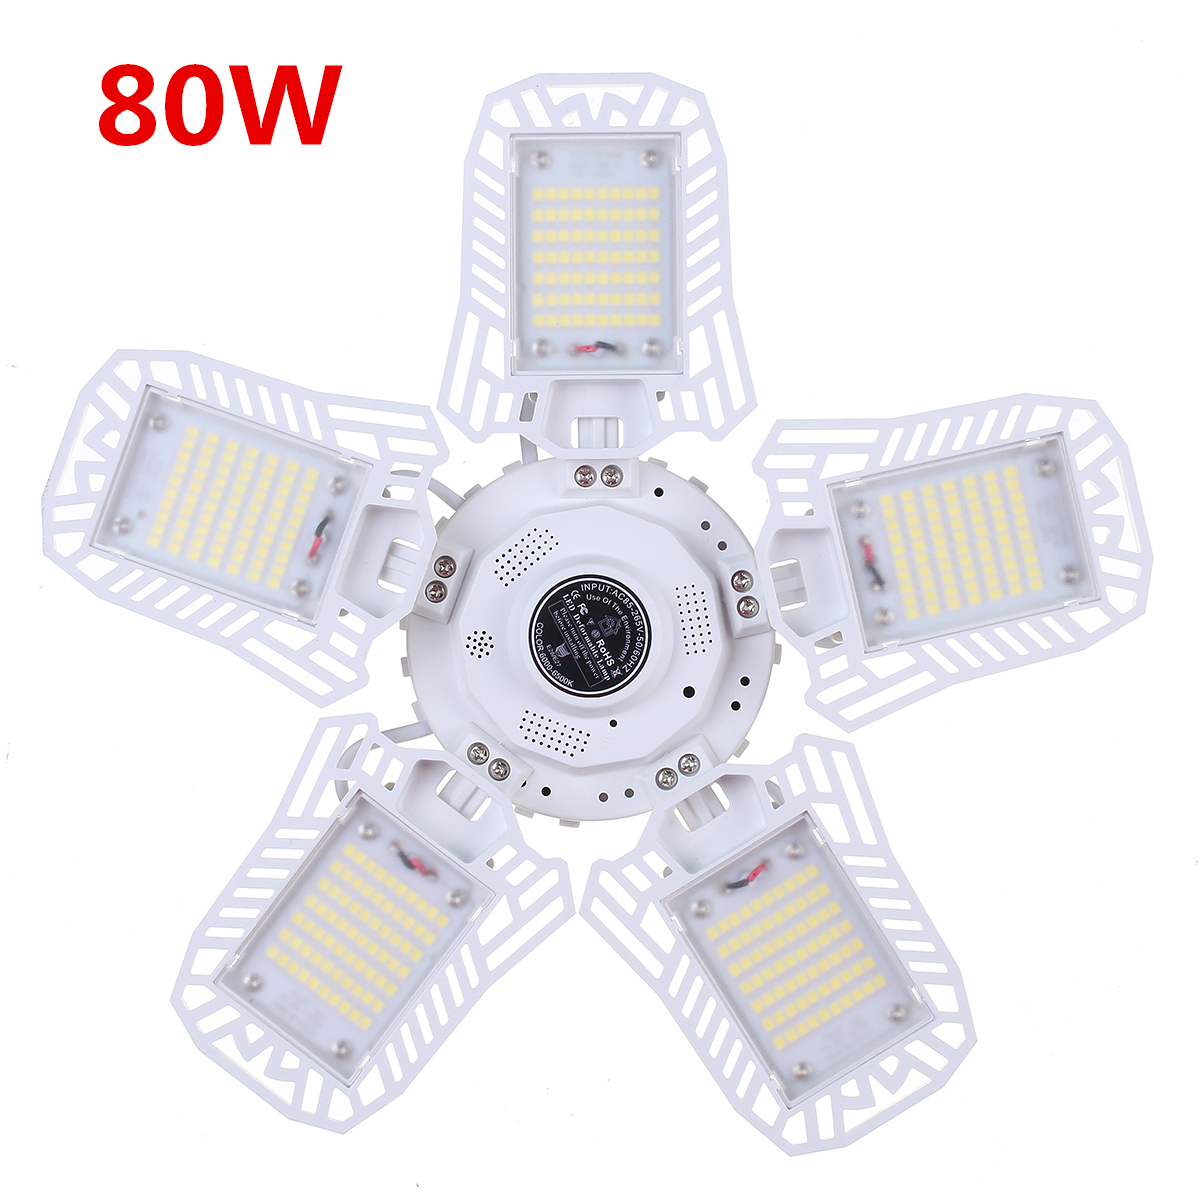 6080100W-Upgrade-Version-Deformable-Ultra-bright-LED-Garage-Ceiling-Light-with-5-Adjustable-Panels-f-1807164-9